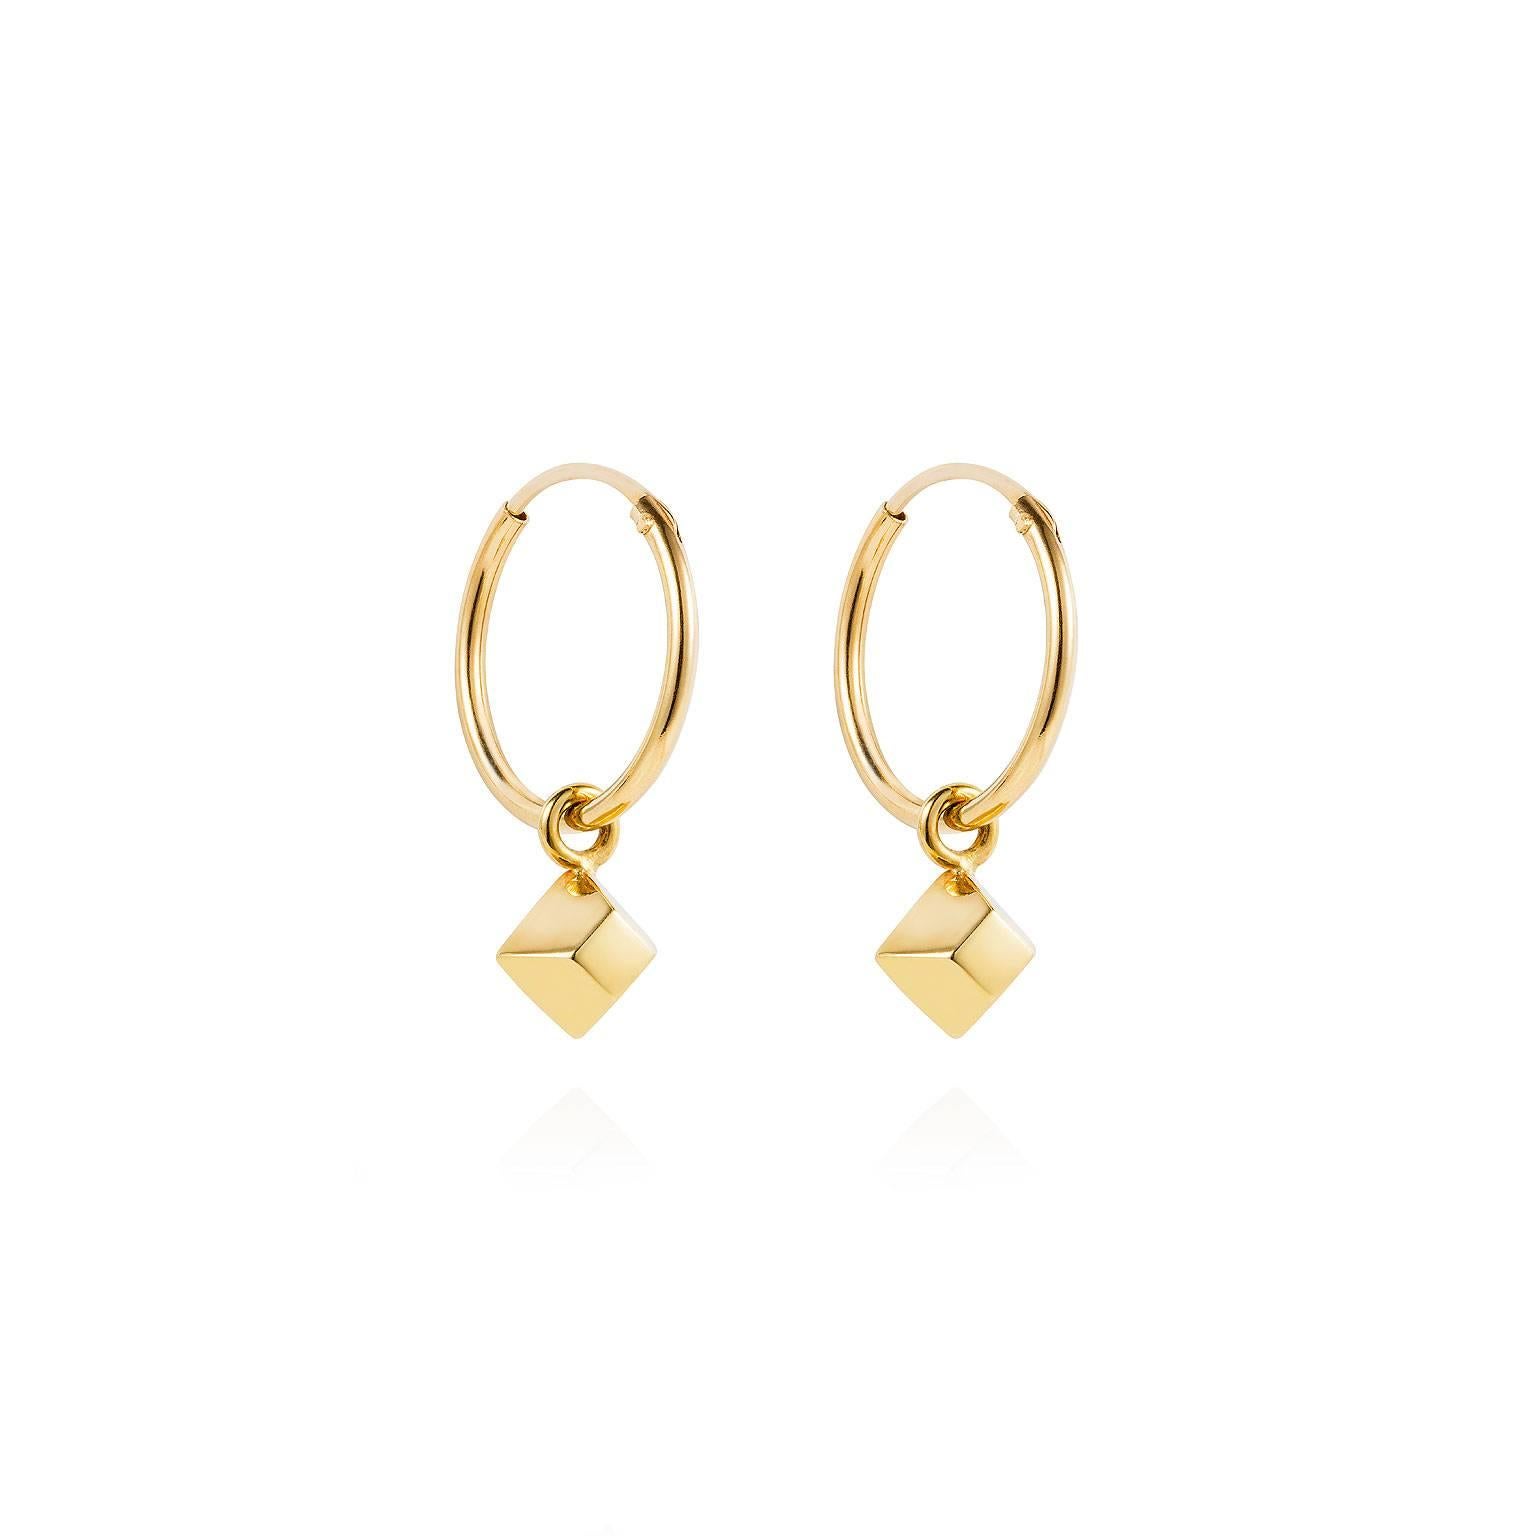 Wear alone or as part of a cool layered look if you have multiple piercings. These delicate mini pyramid hoop earrings open with an integral hinge at the top of the hoop, and close to create a sleek circular earring.

Crafted in 18k yellow gold they